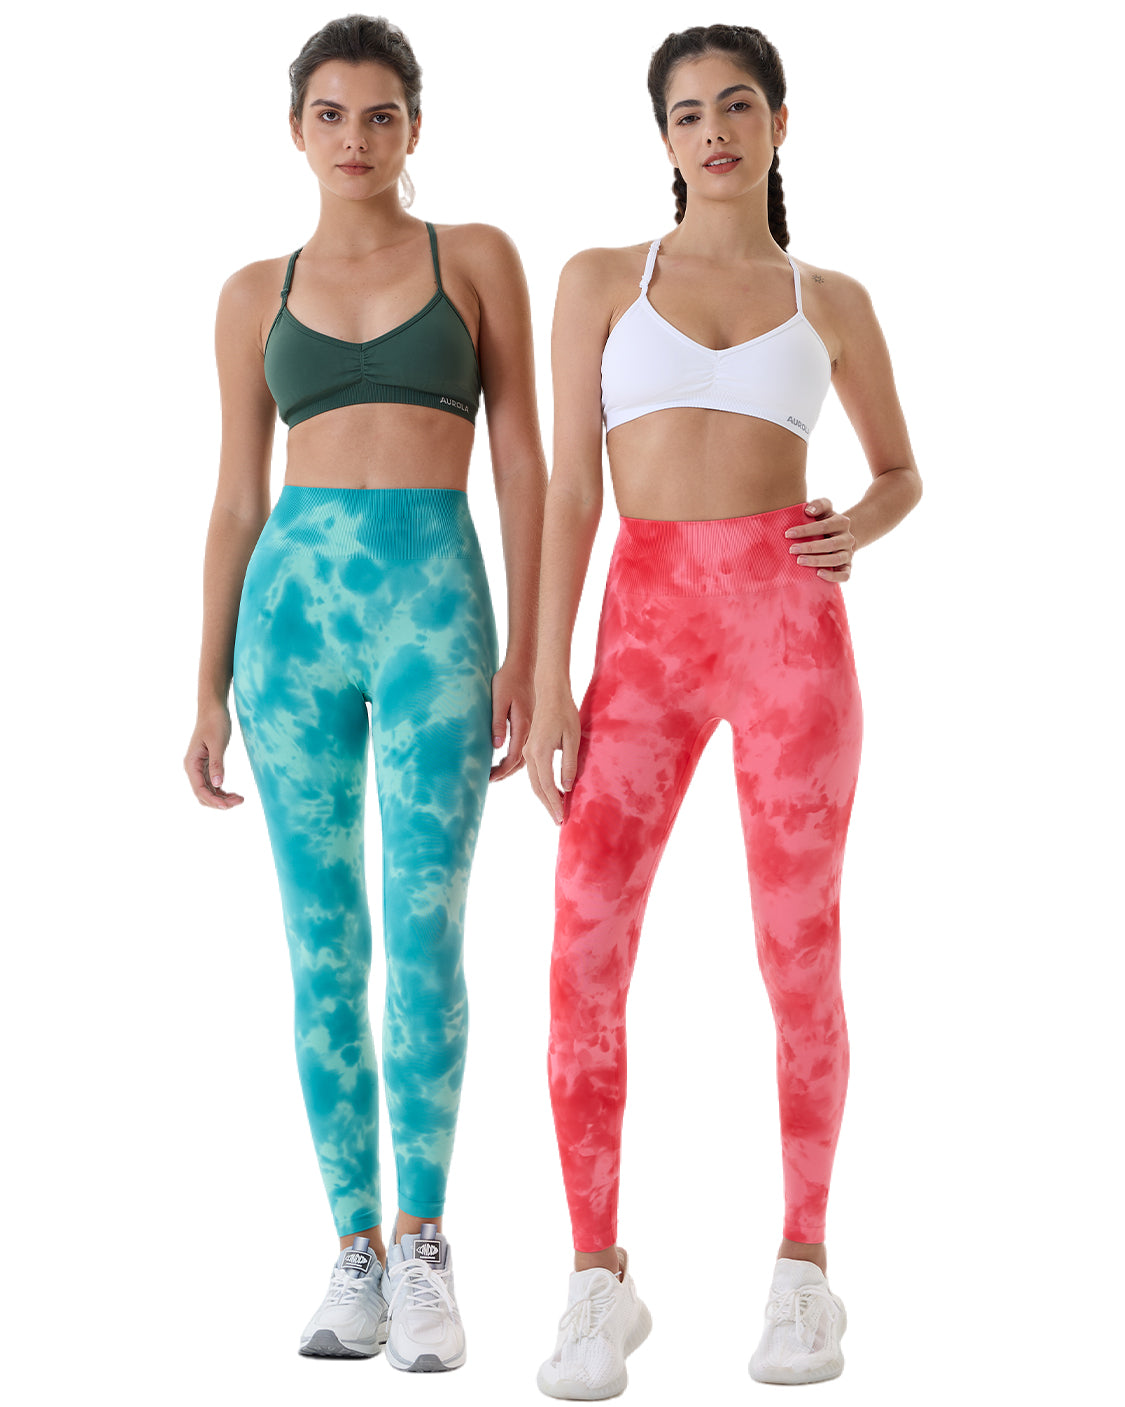 OVESPORT 3 Pack Tie Dye Seamless High Waisted Palestine